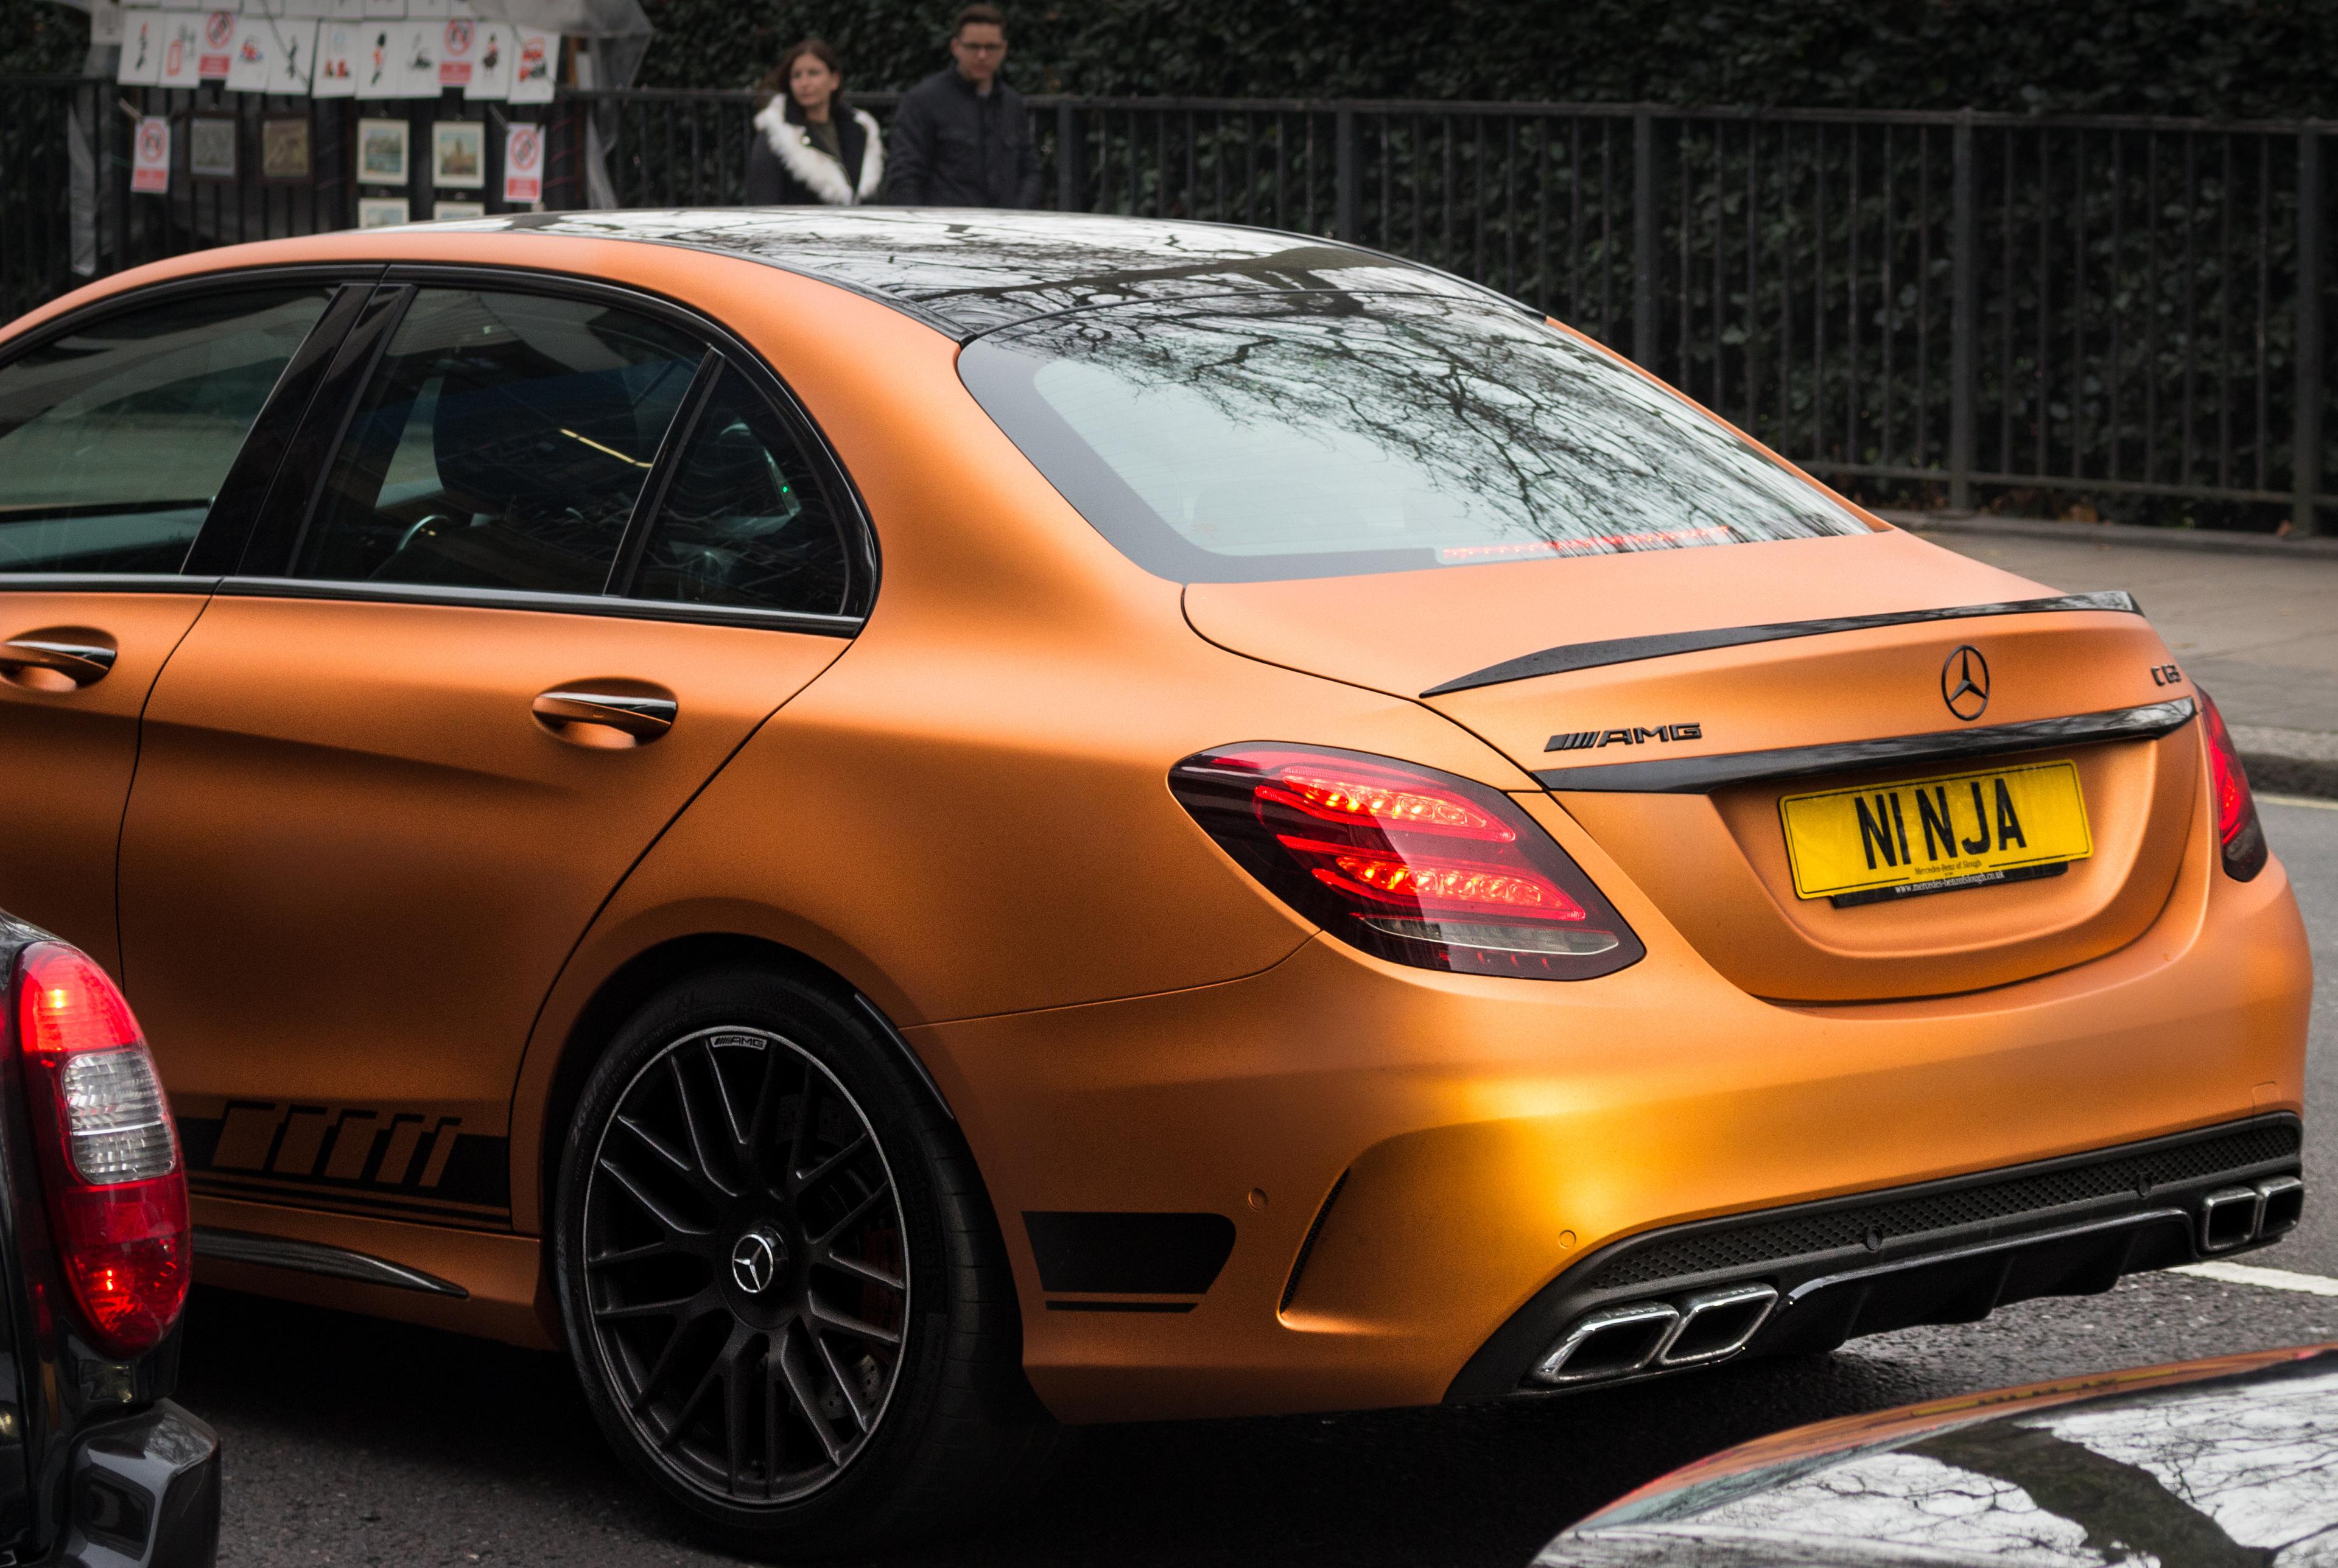 A close up of an orange Mercedes with a personalised number plate 